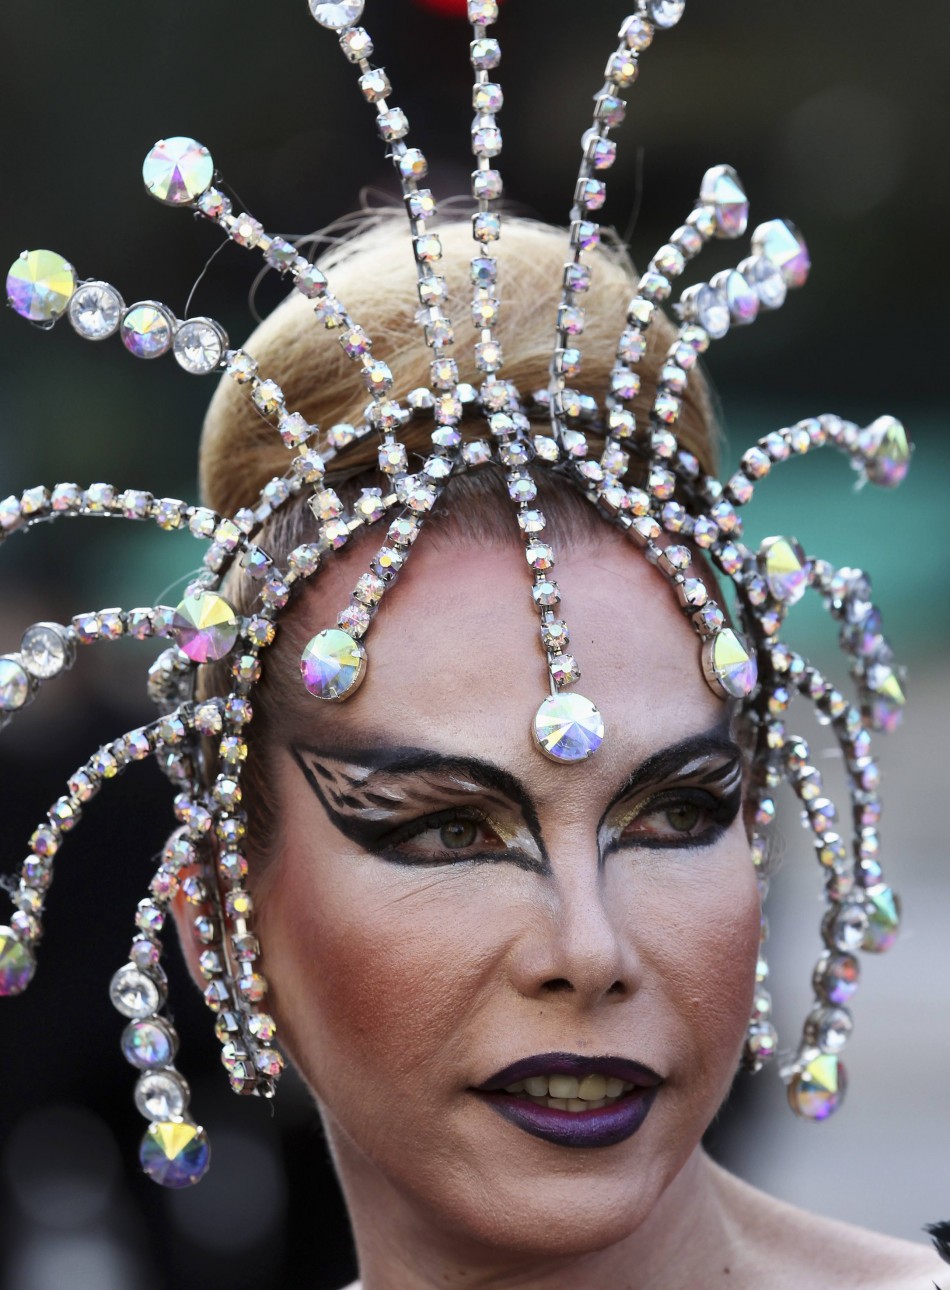 A participant parades during the 16th LGBT pride parade in Sao Paulo